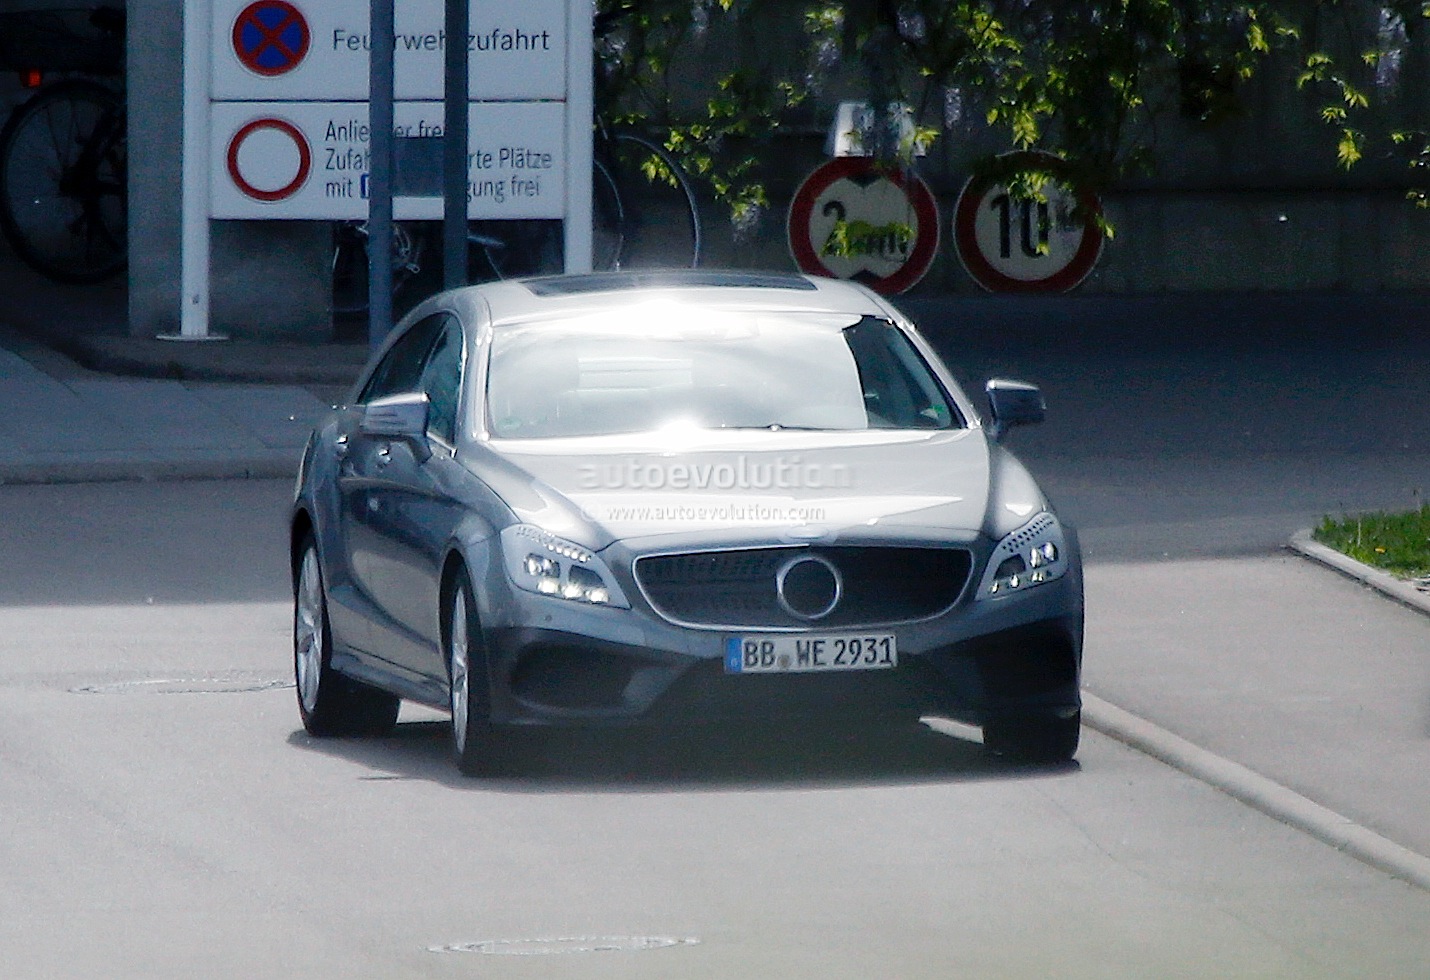 2015 Mercedes-Benz CLS Facelift Spotted With Minimal Camo 